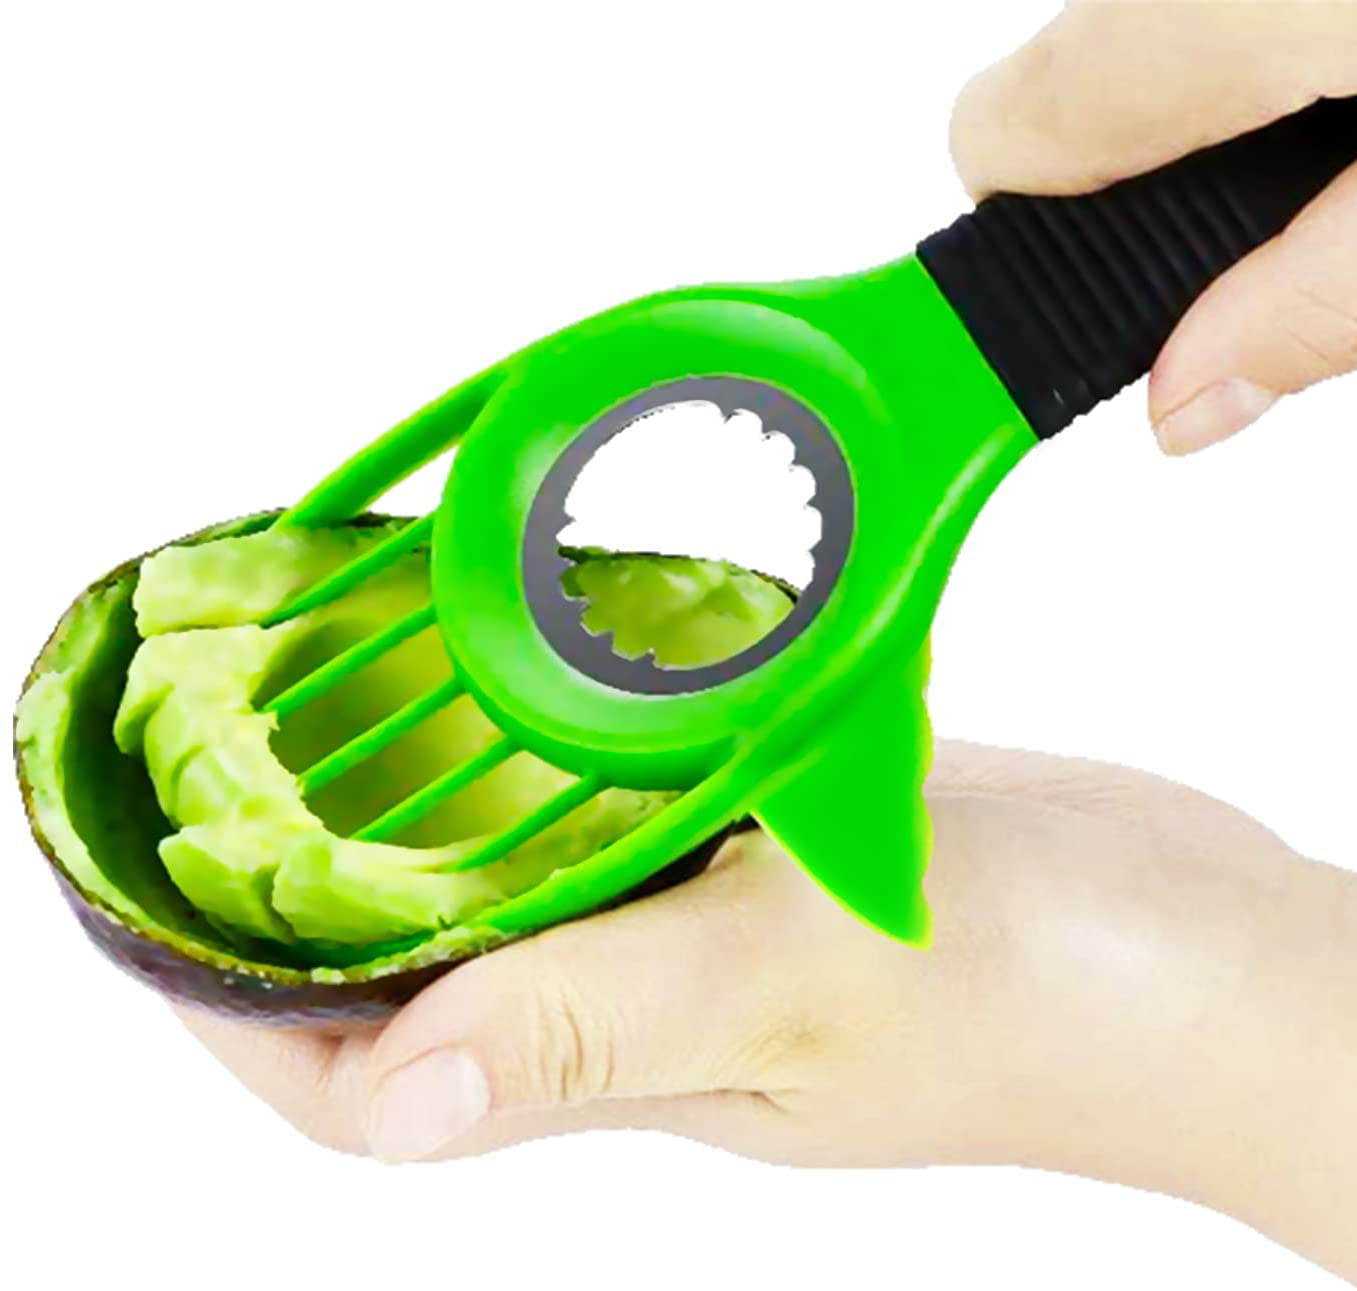 Avocado Cutter Slicer and Pitter 3 in 1, Avocado Tool with Silicon Grip  Handle Avocado Pitter, BPA Free Avocado Slicer Pit Remover, Multifunctional  Avocado Knife to Split Pit Cut 